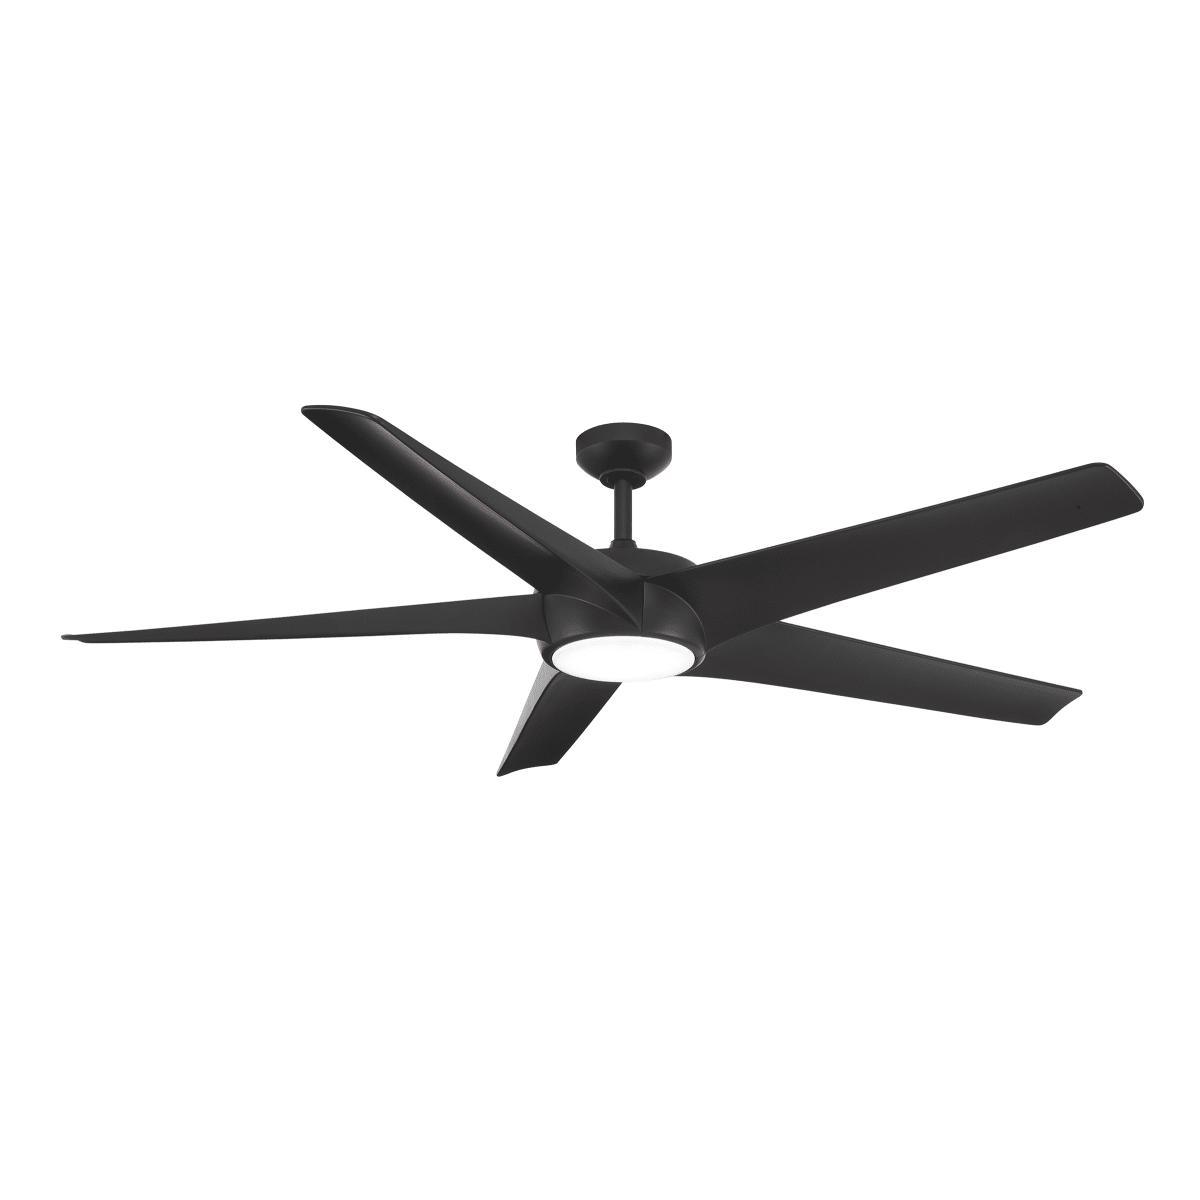 Skymaster 64 Inch LED Ceiling Fan with Light Kit and Remote, Coal Finish - Bees Lighting